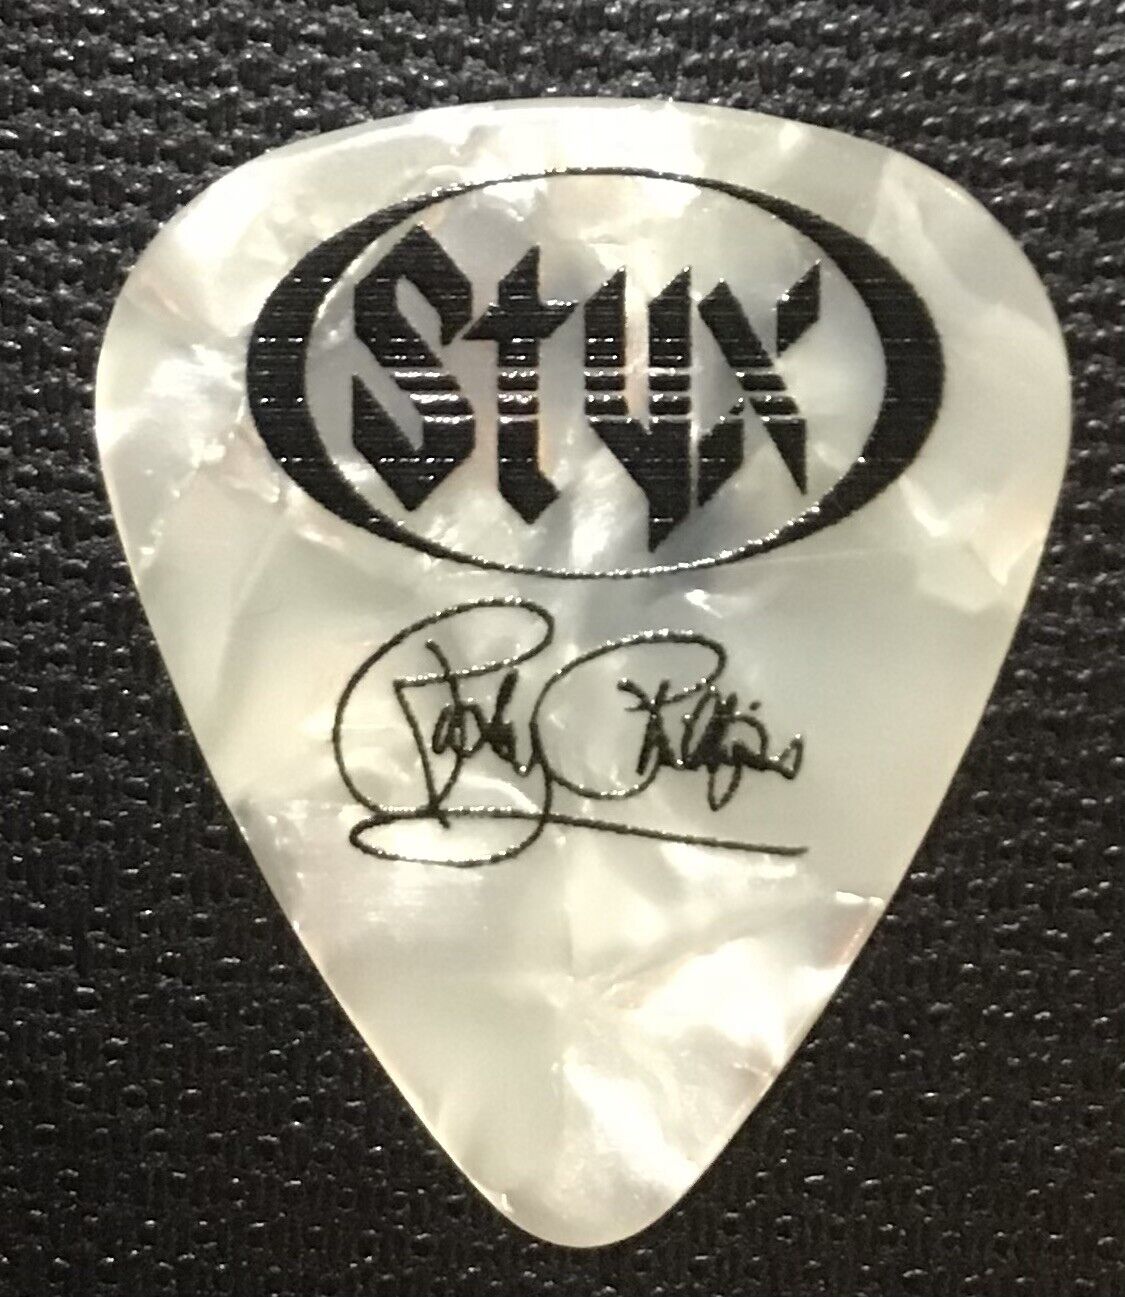 Styx Ricky Phillips Signature White Pearl Guitar Pick - 2019 Tour